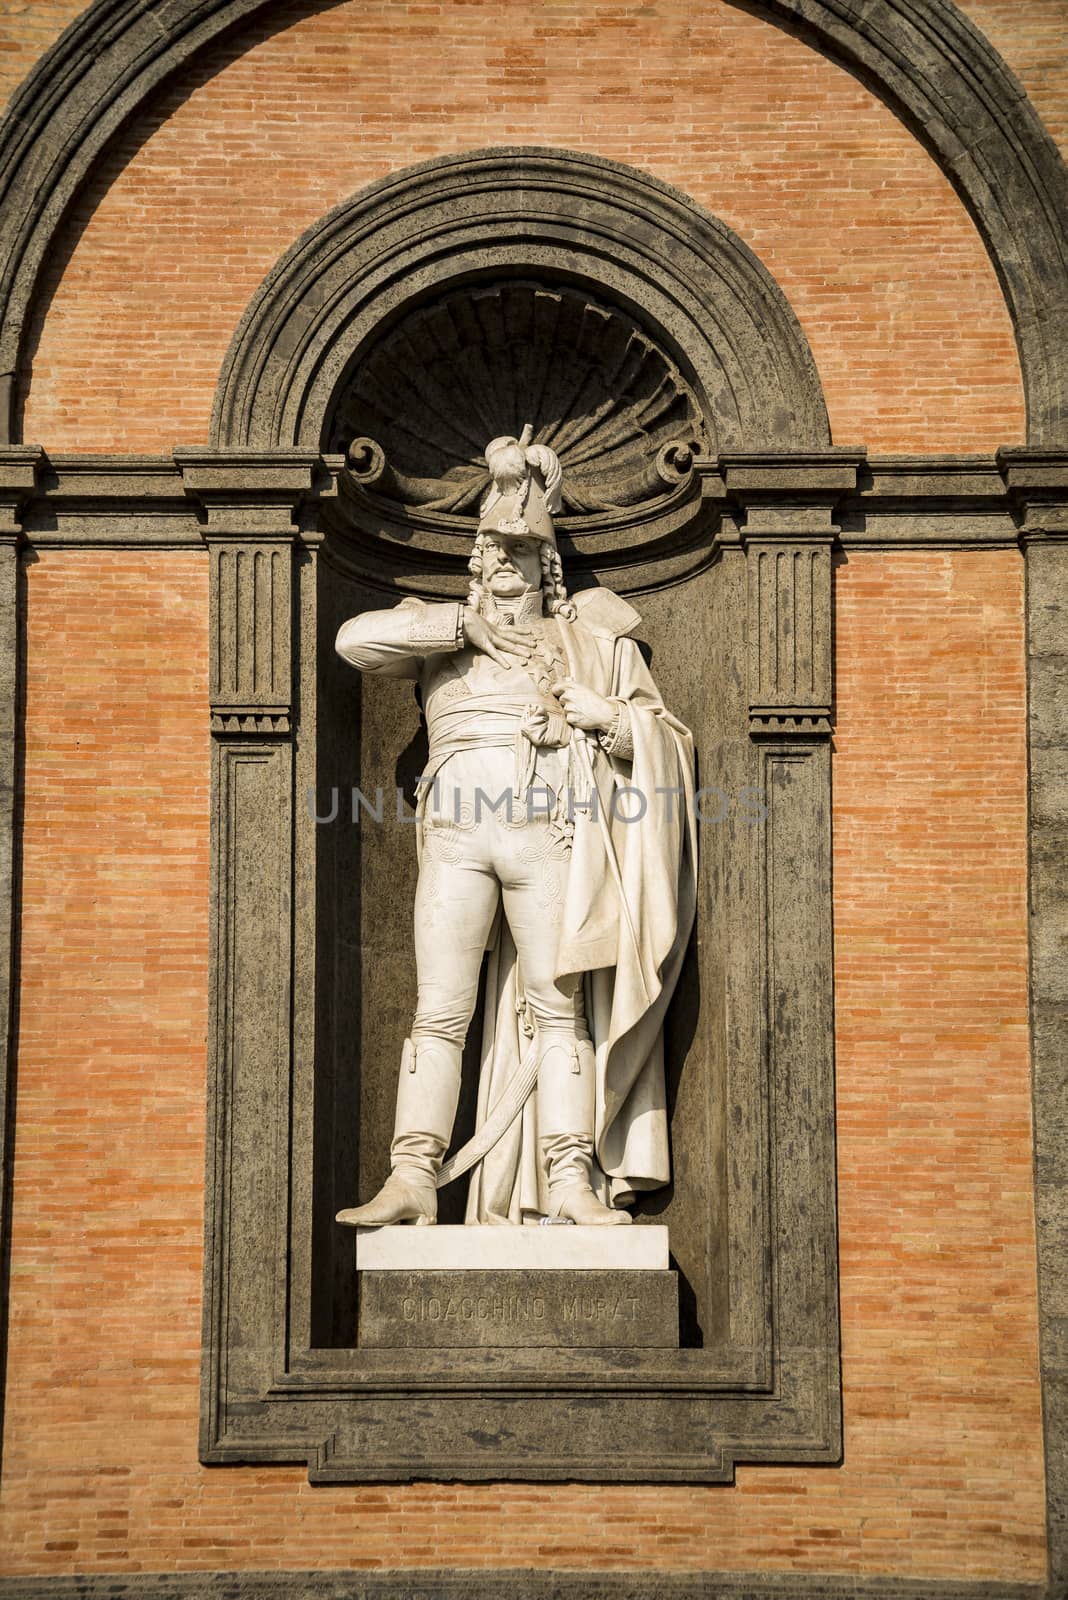 Statue of king Joachim Murat in a niche of the wall of the Royal Palace of Naples, Italy